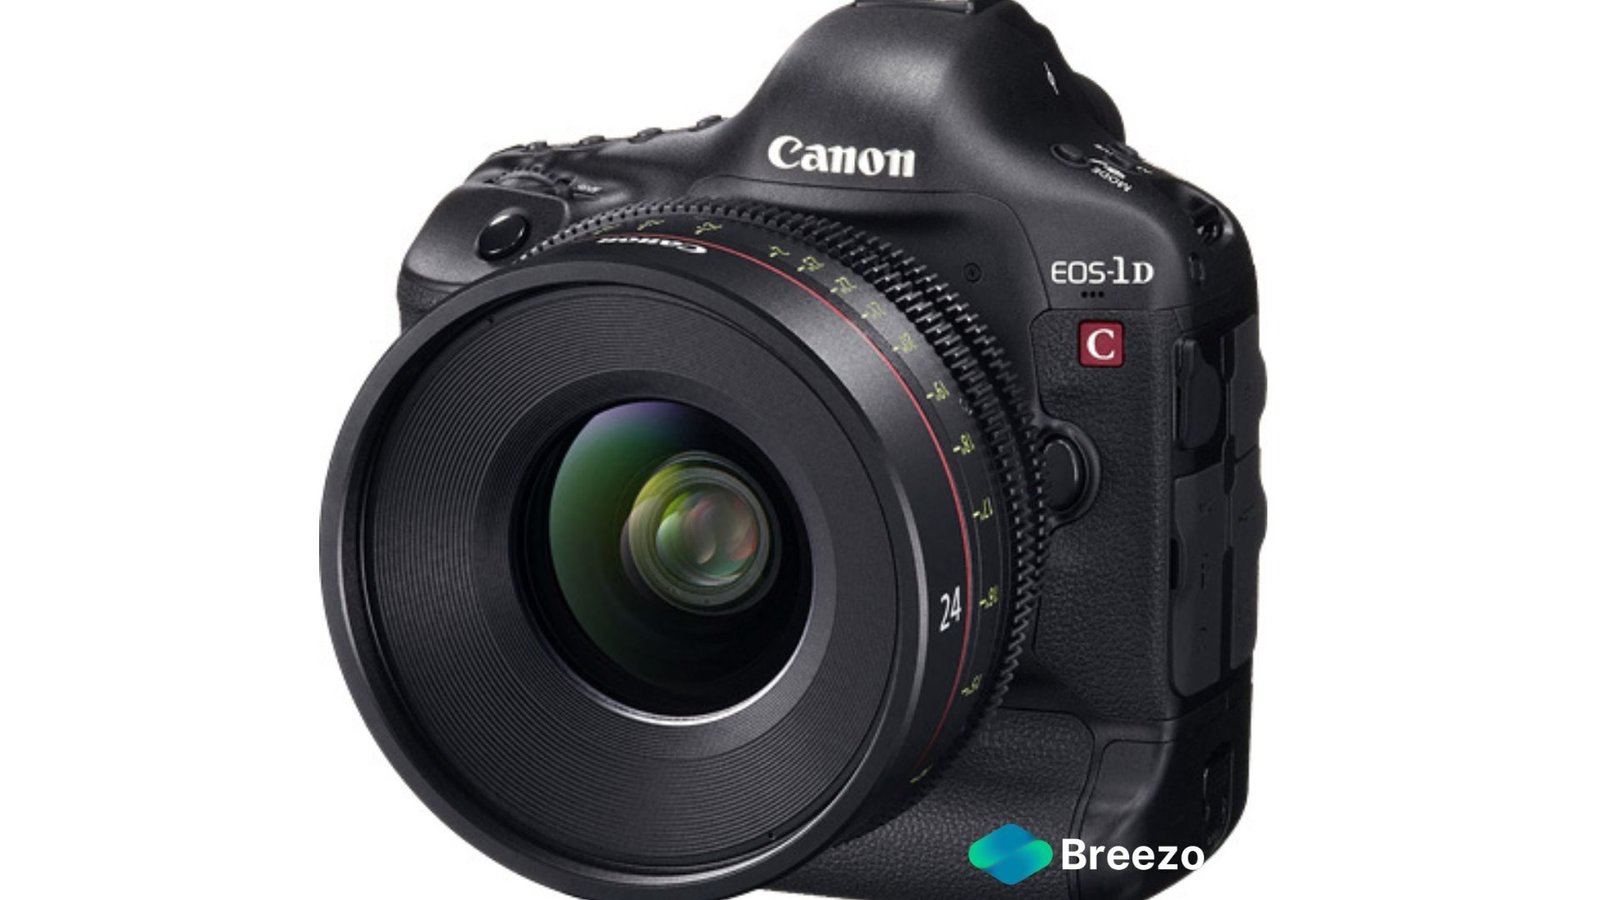 Rent Canon 1-DC Camera Body with with Cp.3 Lens Kit in Delhi NCR, Camera accessories, Camera lenses for rent, in Delhi Gurgaon Noida, hire Shooting equipment, Lighting equipment rental, Film gear rental for Video production, camera rental company in Delhi, film equipment rental company